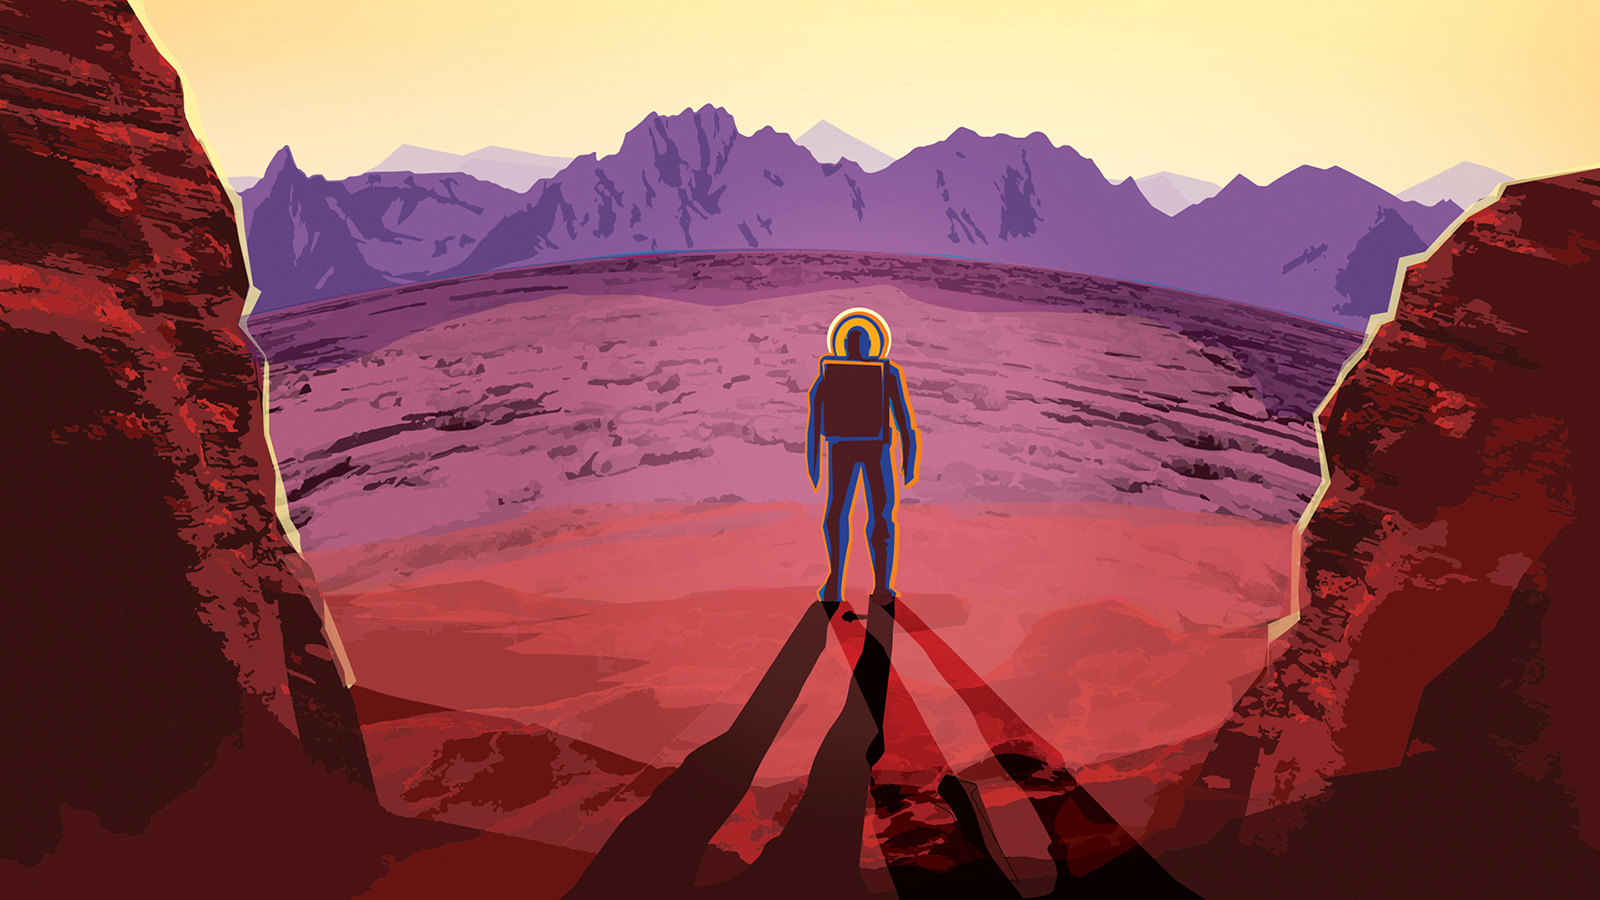 slide 5 - A vintage travel poster image with a traveler standing on the surface of a world with two suns.